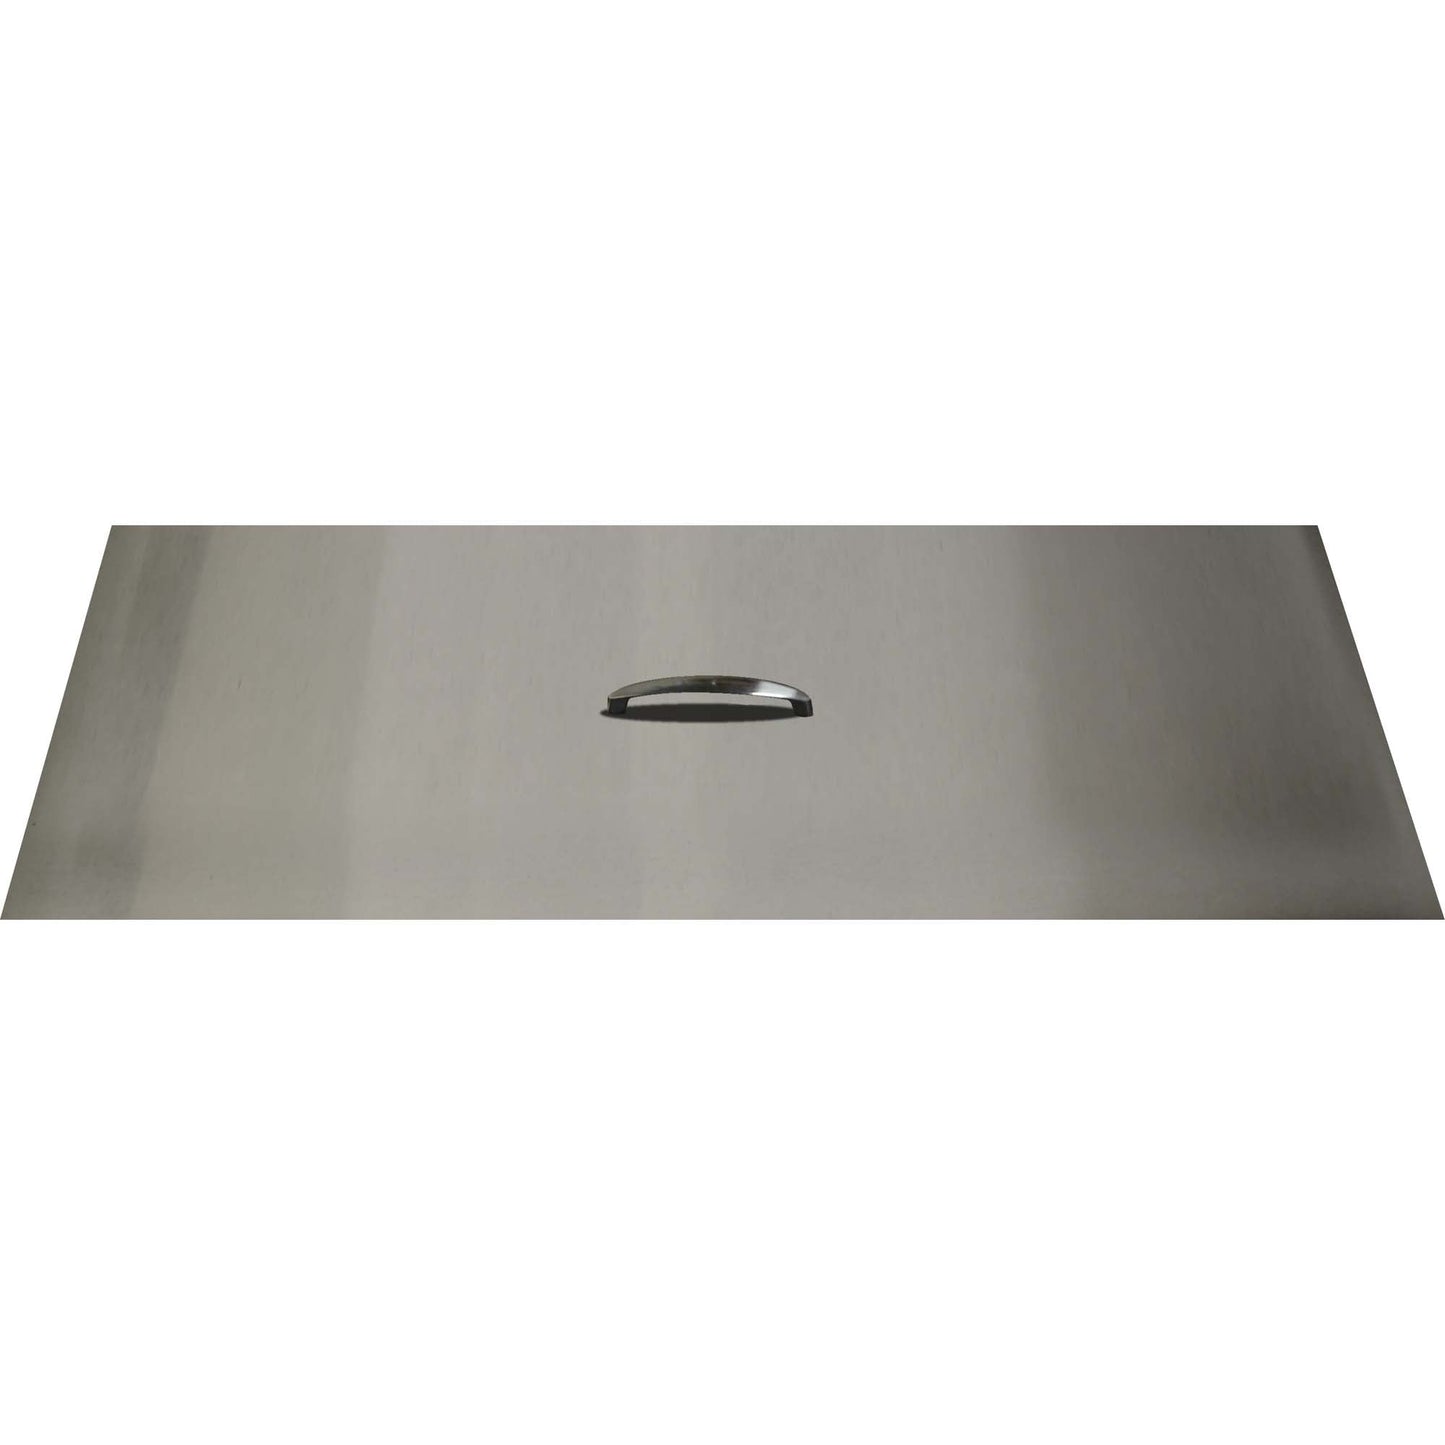 12" x 32" Rectangular Stainless Steel Cover - Stainless Steel Handle-Novel Home